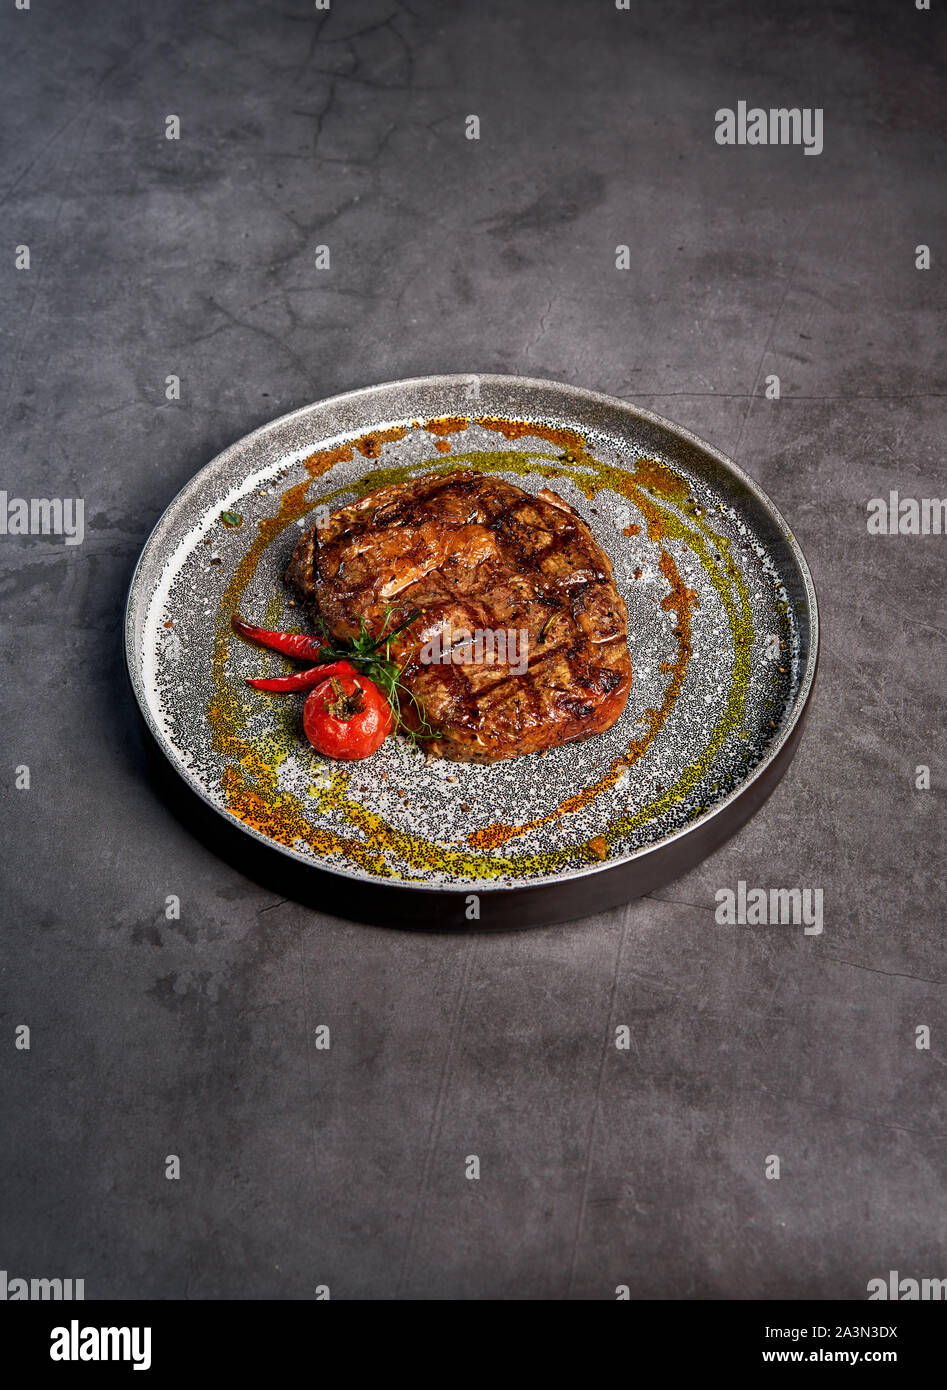 chic meat steak with pepper on a plate Stock Photo